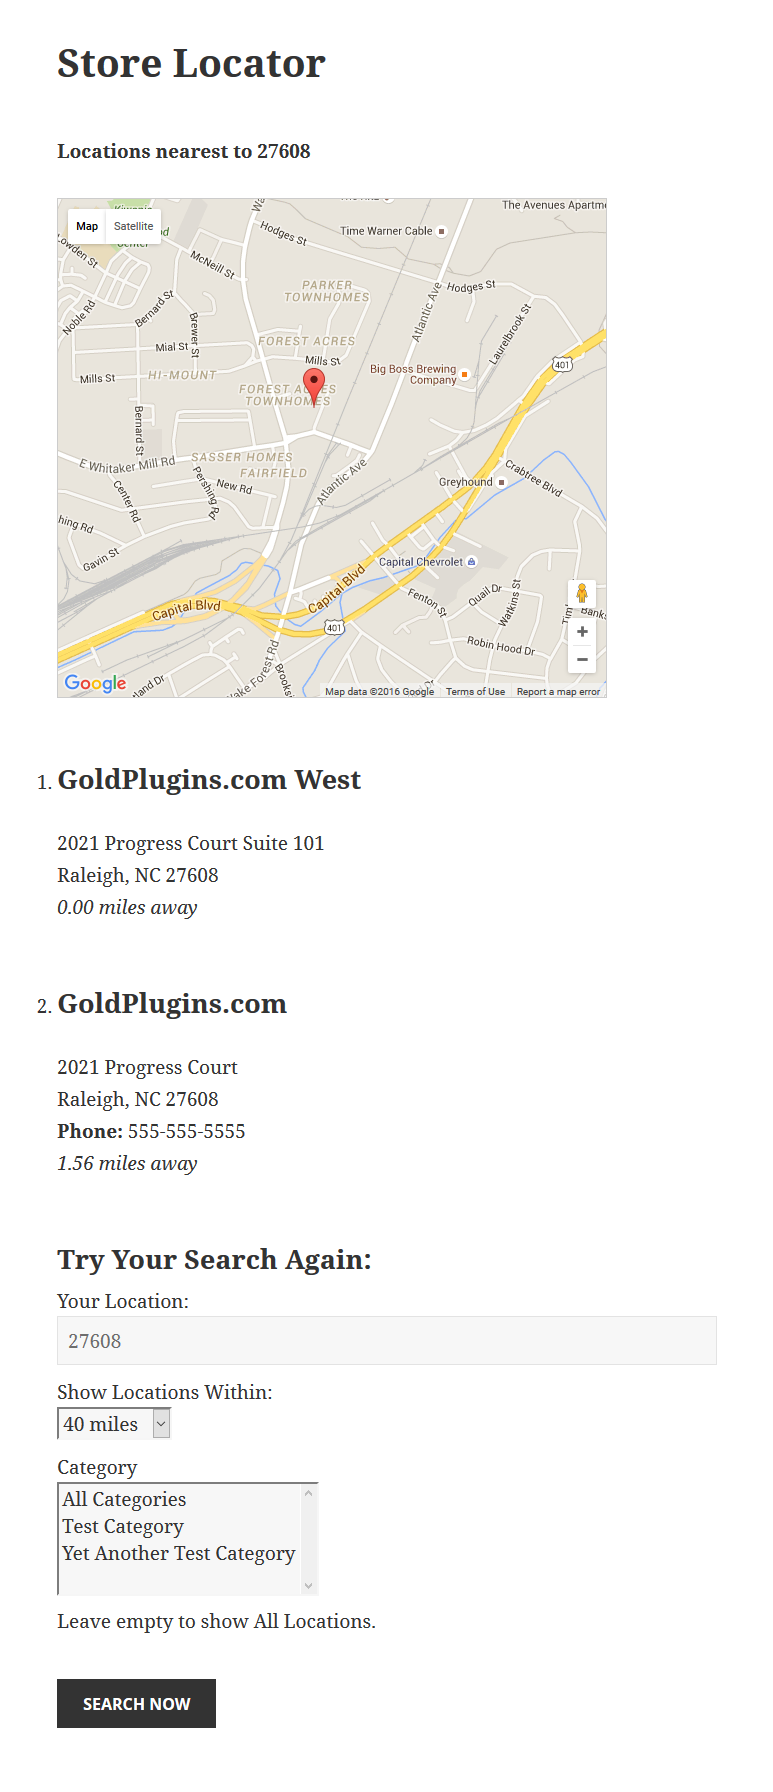 This is the List of Locations Widget.